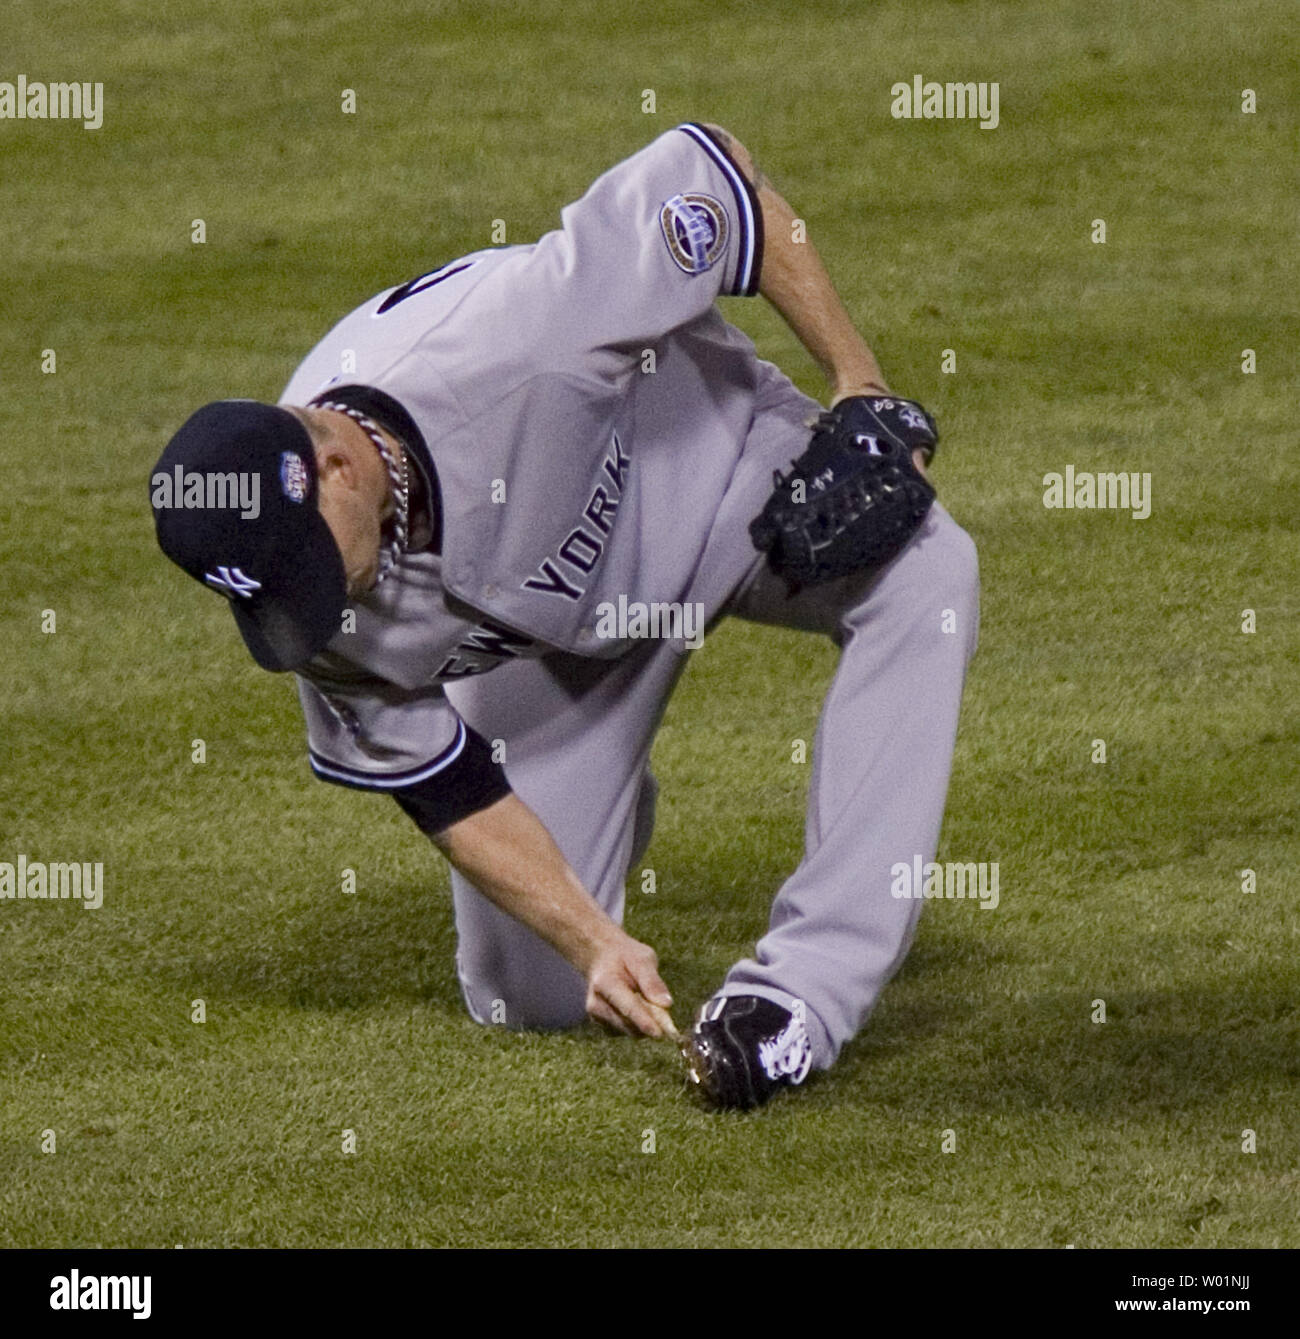 New York Yankees pitcher A. J. Burnett stops the game during first inning of game 5 of the World Series in Philadelphia on November 2, 2009 to clean mud off his cleats.      UPI/John Anderson Stock Photo